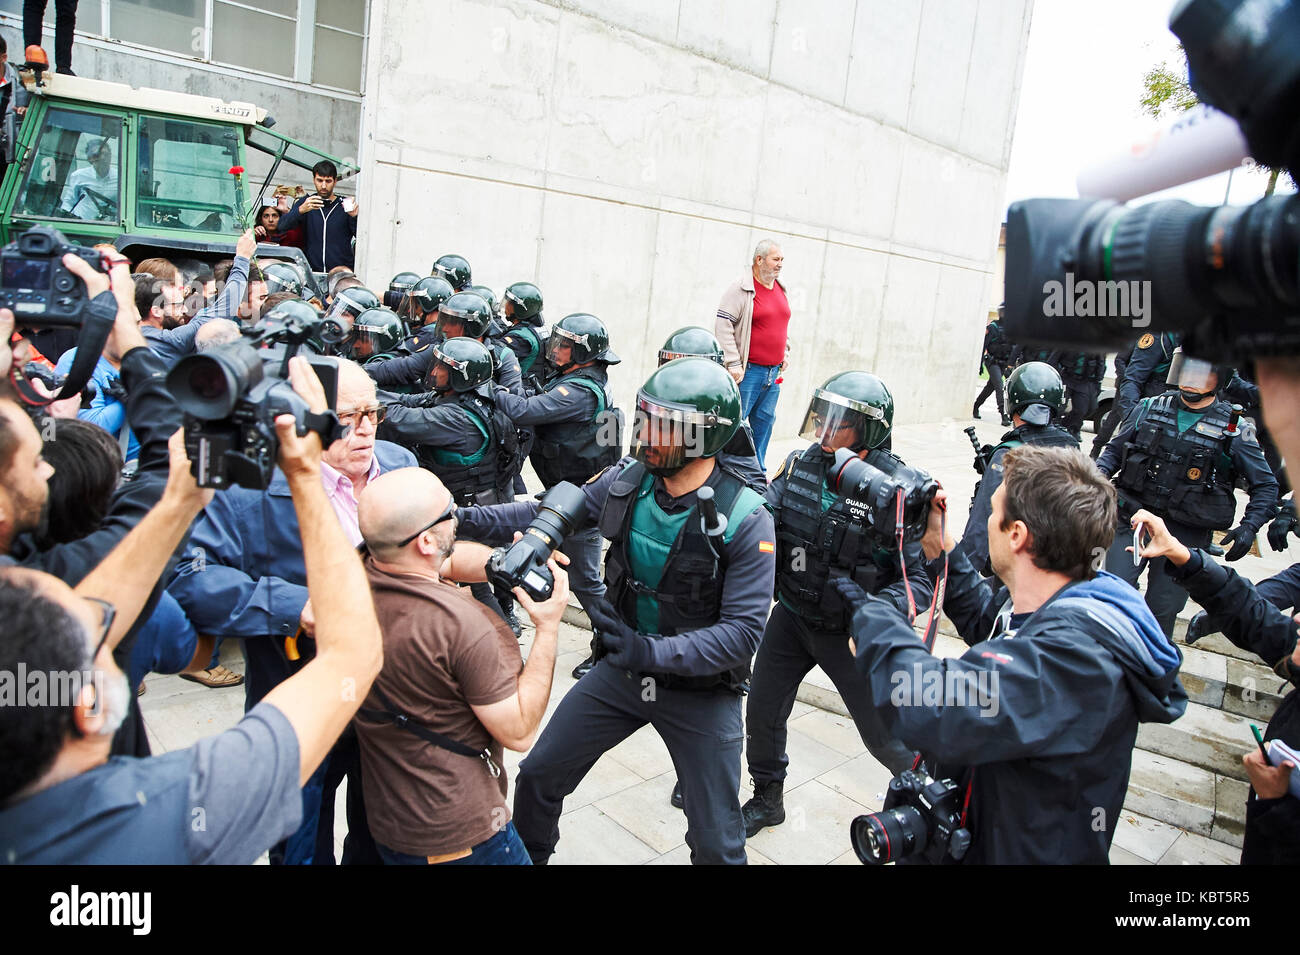 Girona, Spain. 1 October, 2017. Sant Julia de Ramis, place of vote of the catalan president Carles Puigdemont. The Guardia Civil charge against the people impeding that makes a vote. The referendum has been deemed illegal by the Spanish government in Madrid Credit: Pablo Guillen/Alamy Live News Stock Photo